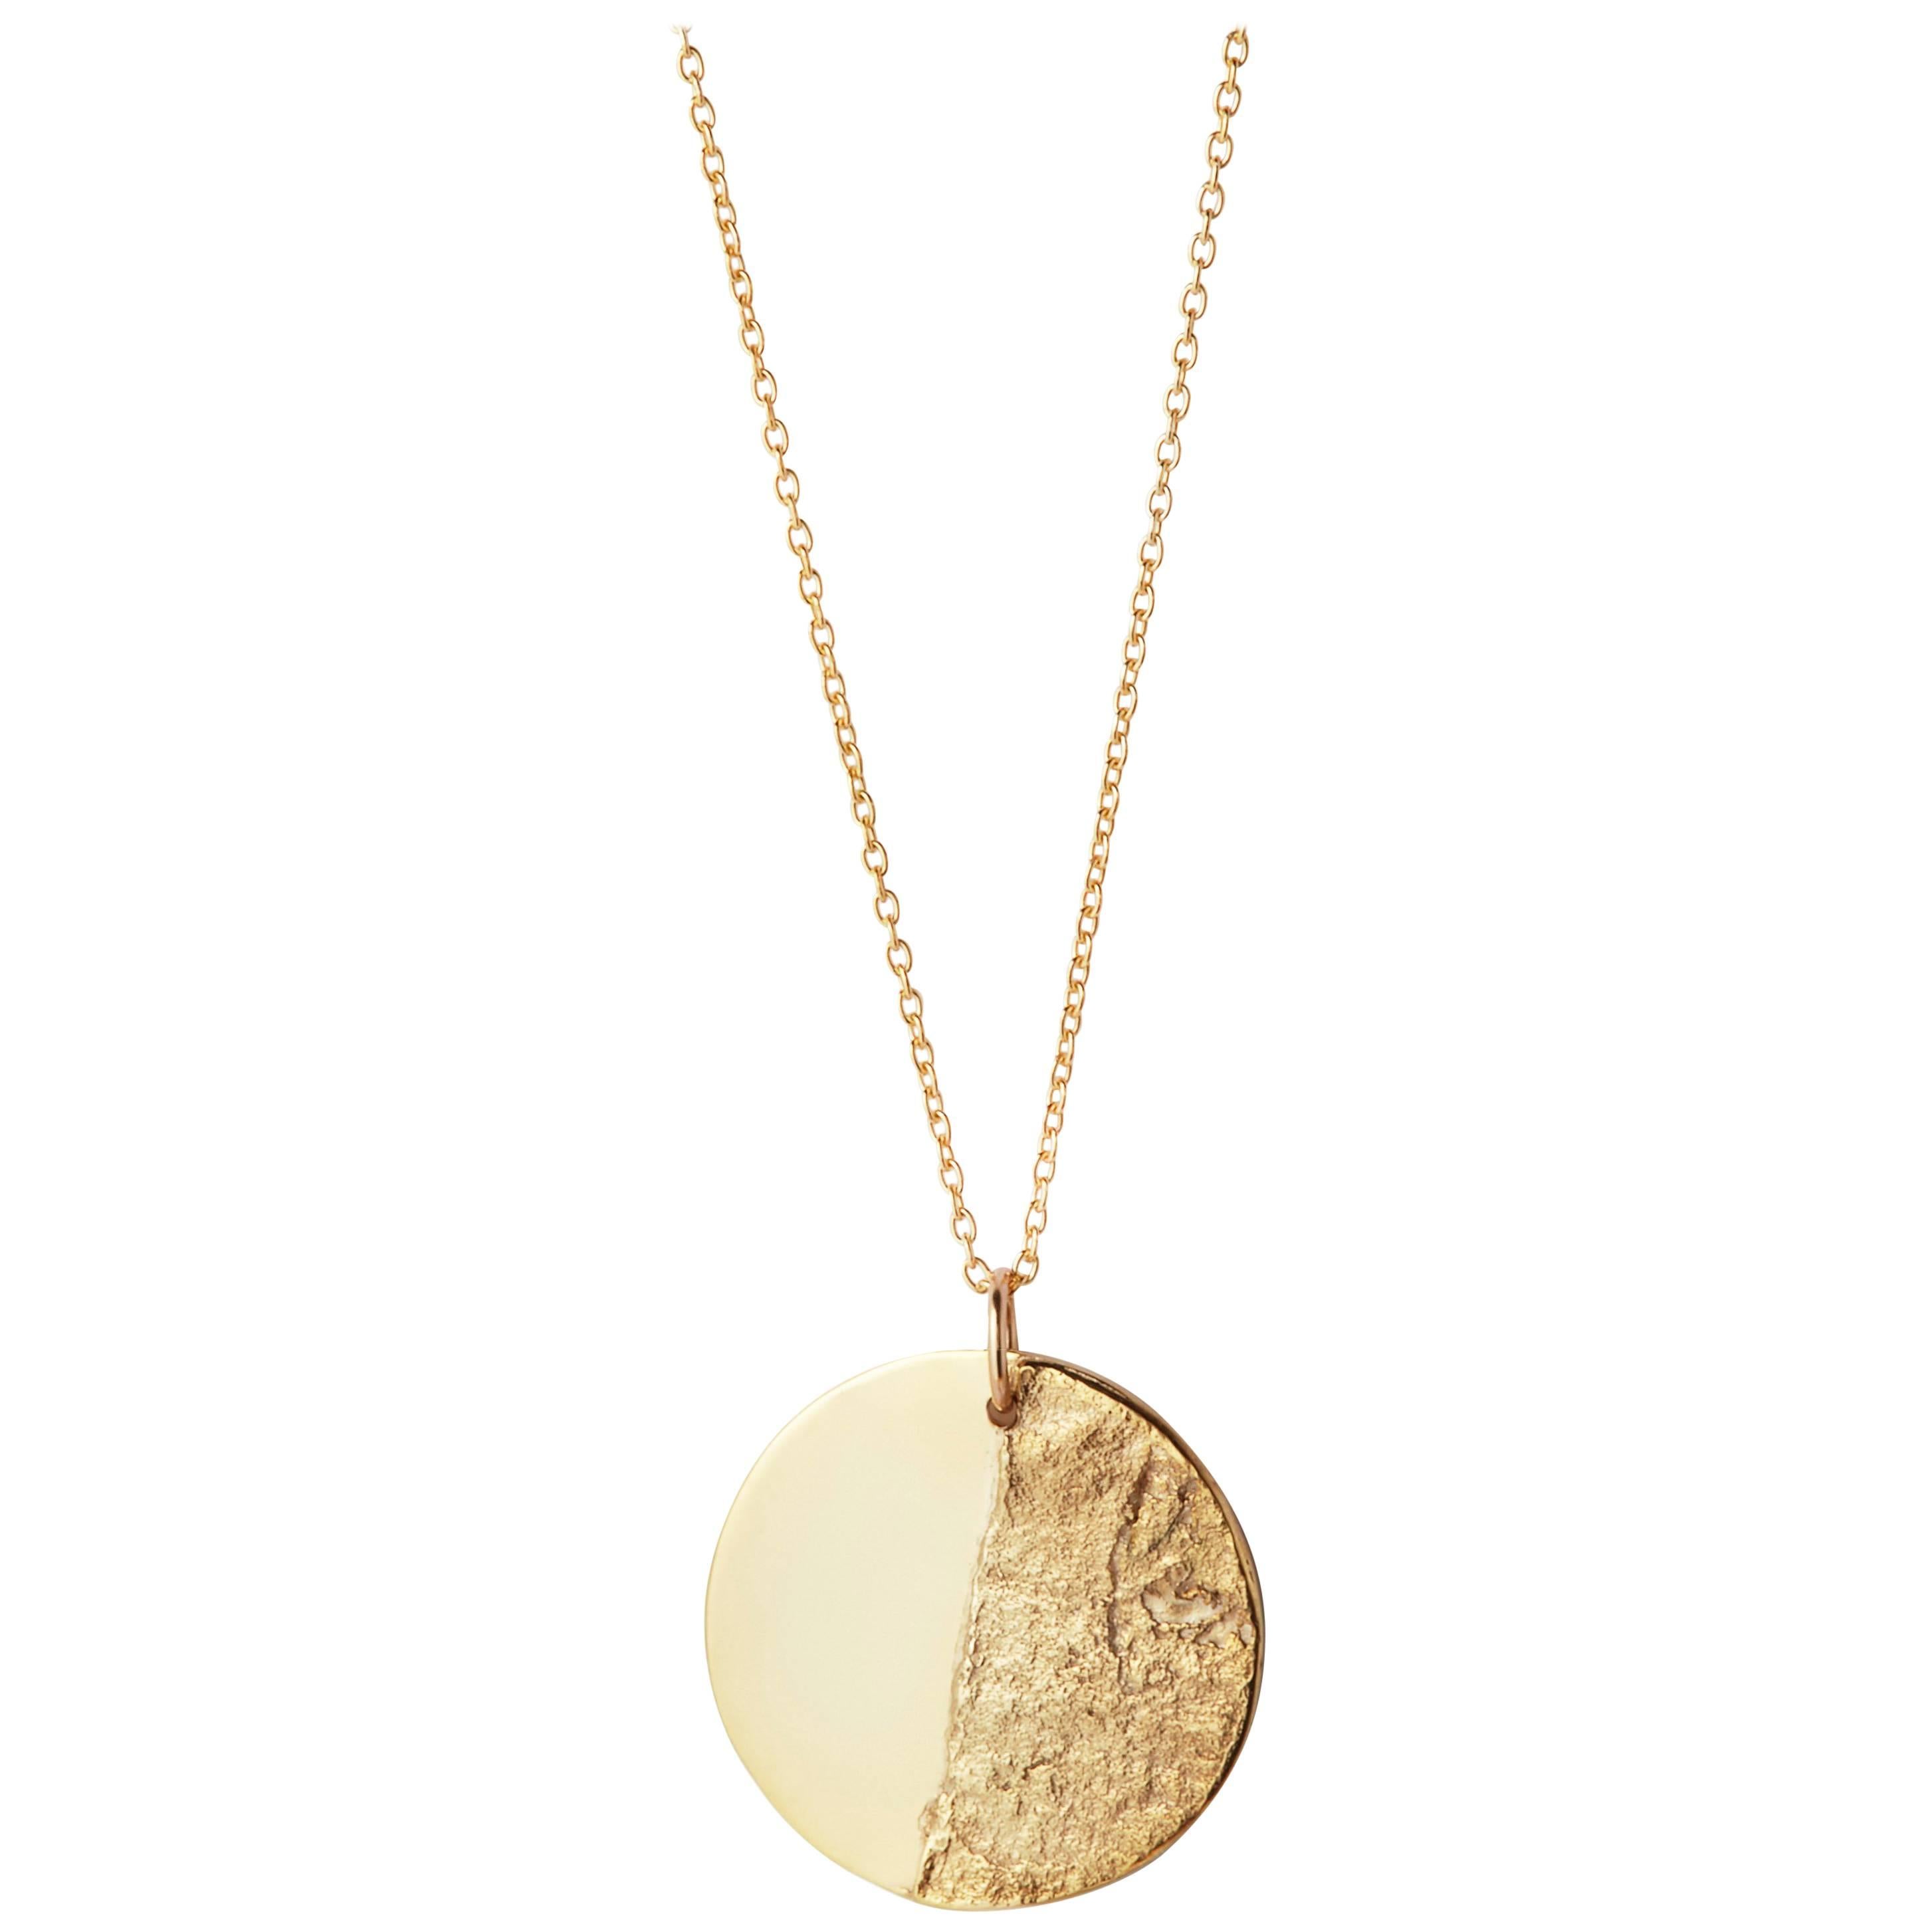 Split Disc Necklace in 18 Karat Yellow Gold by Allison Bryan For Sale